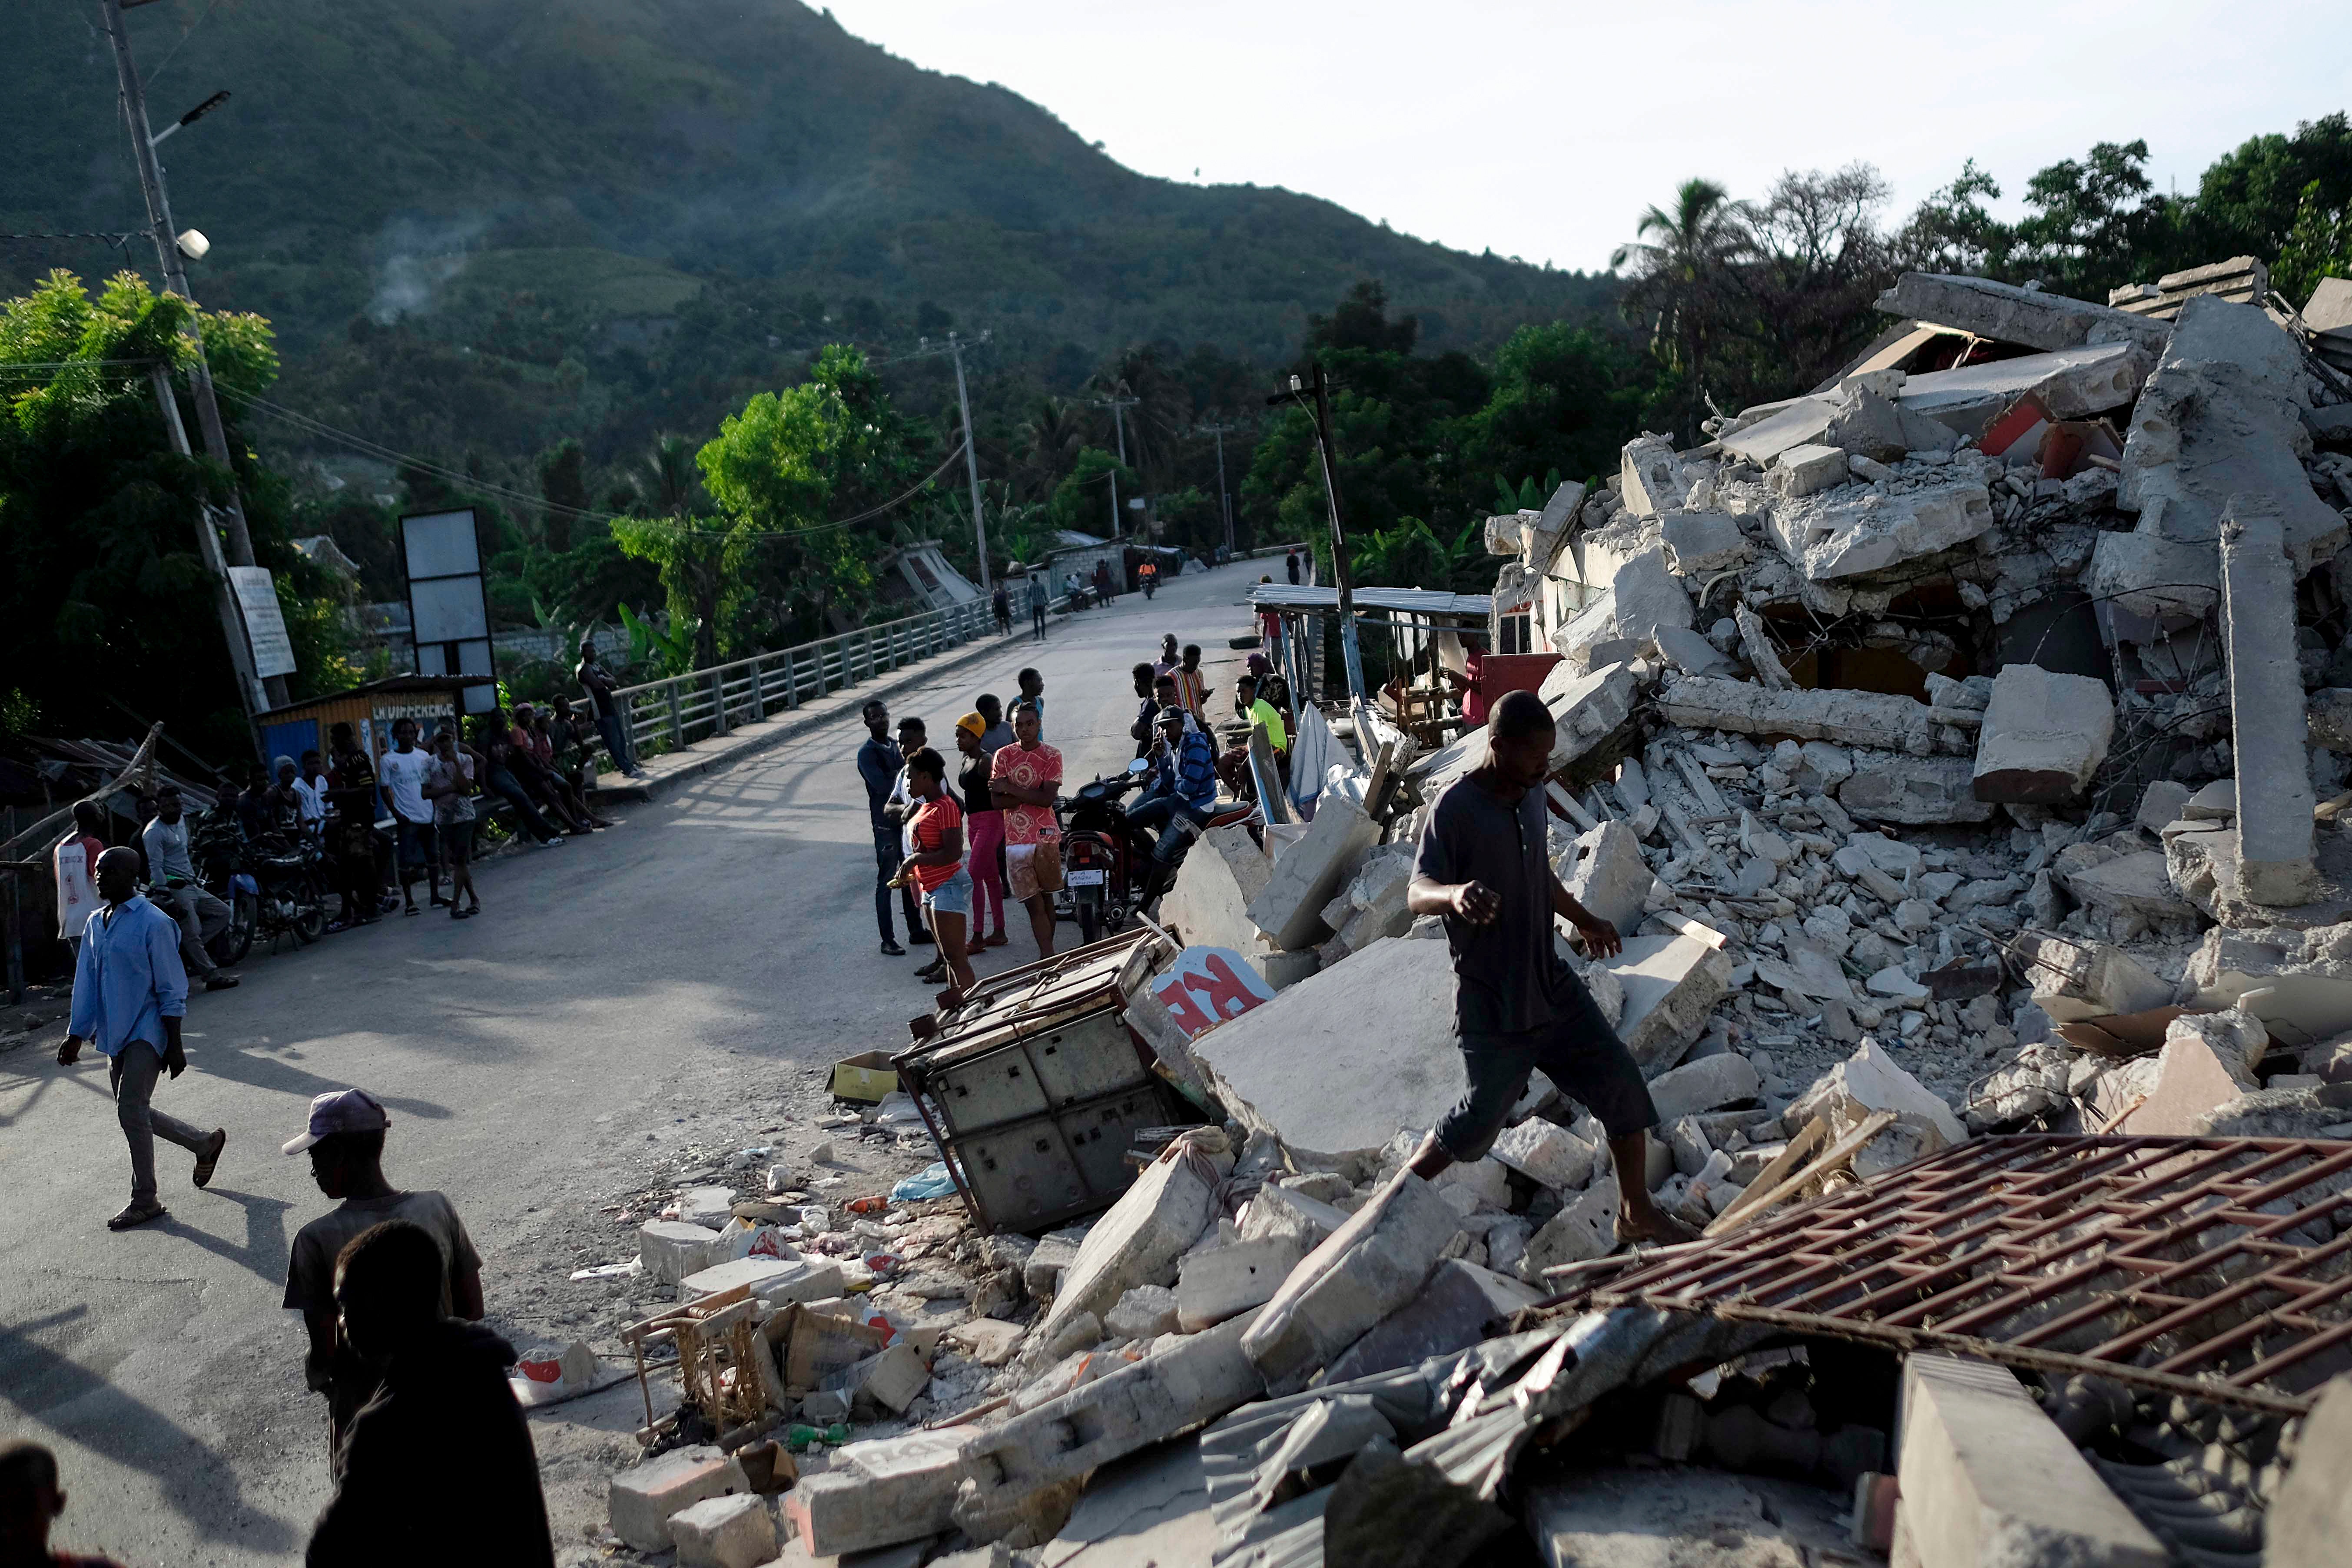 Haiti earthquake: Tropical Depression Grace a concern for recovery efforts with forecasts of heavy rain